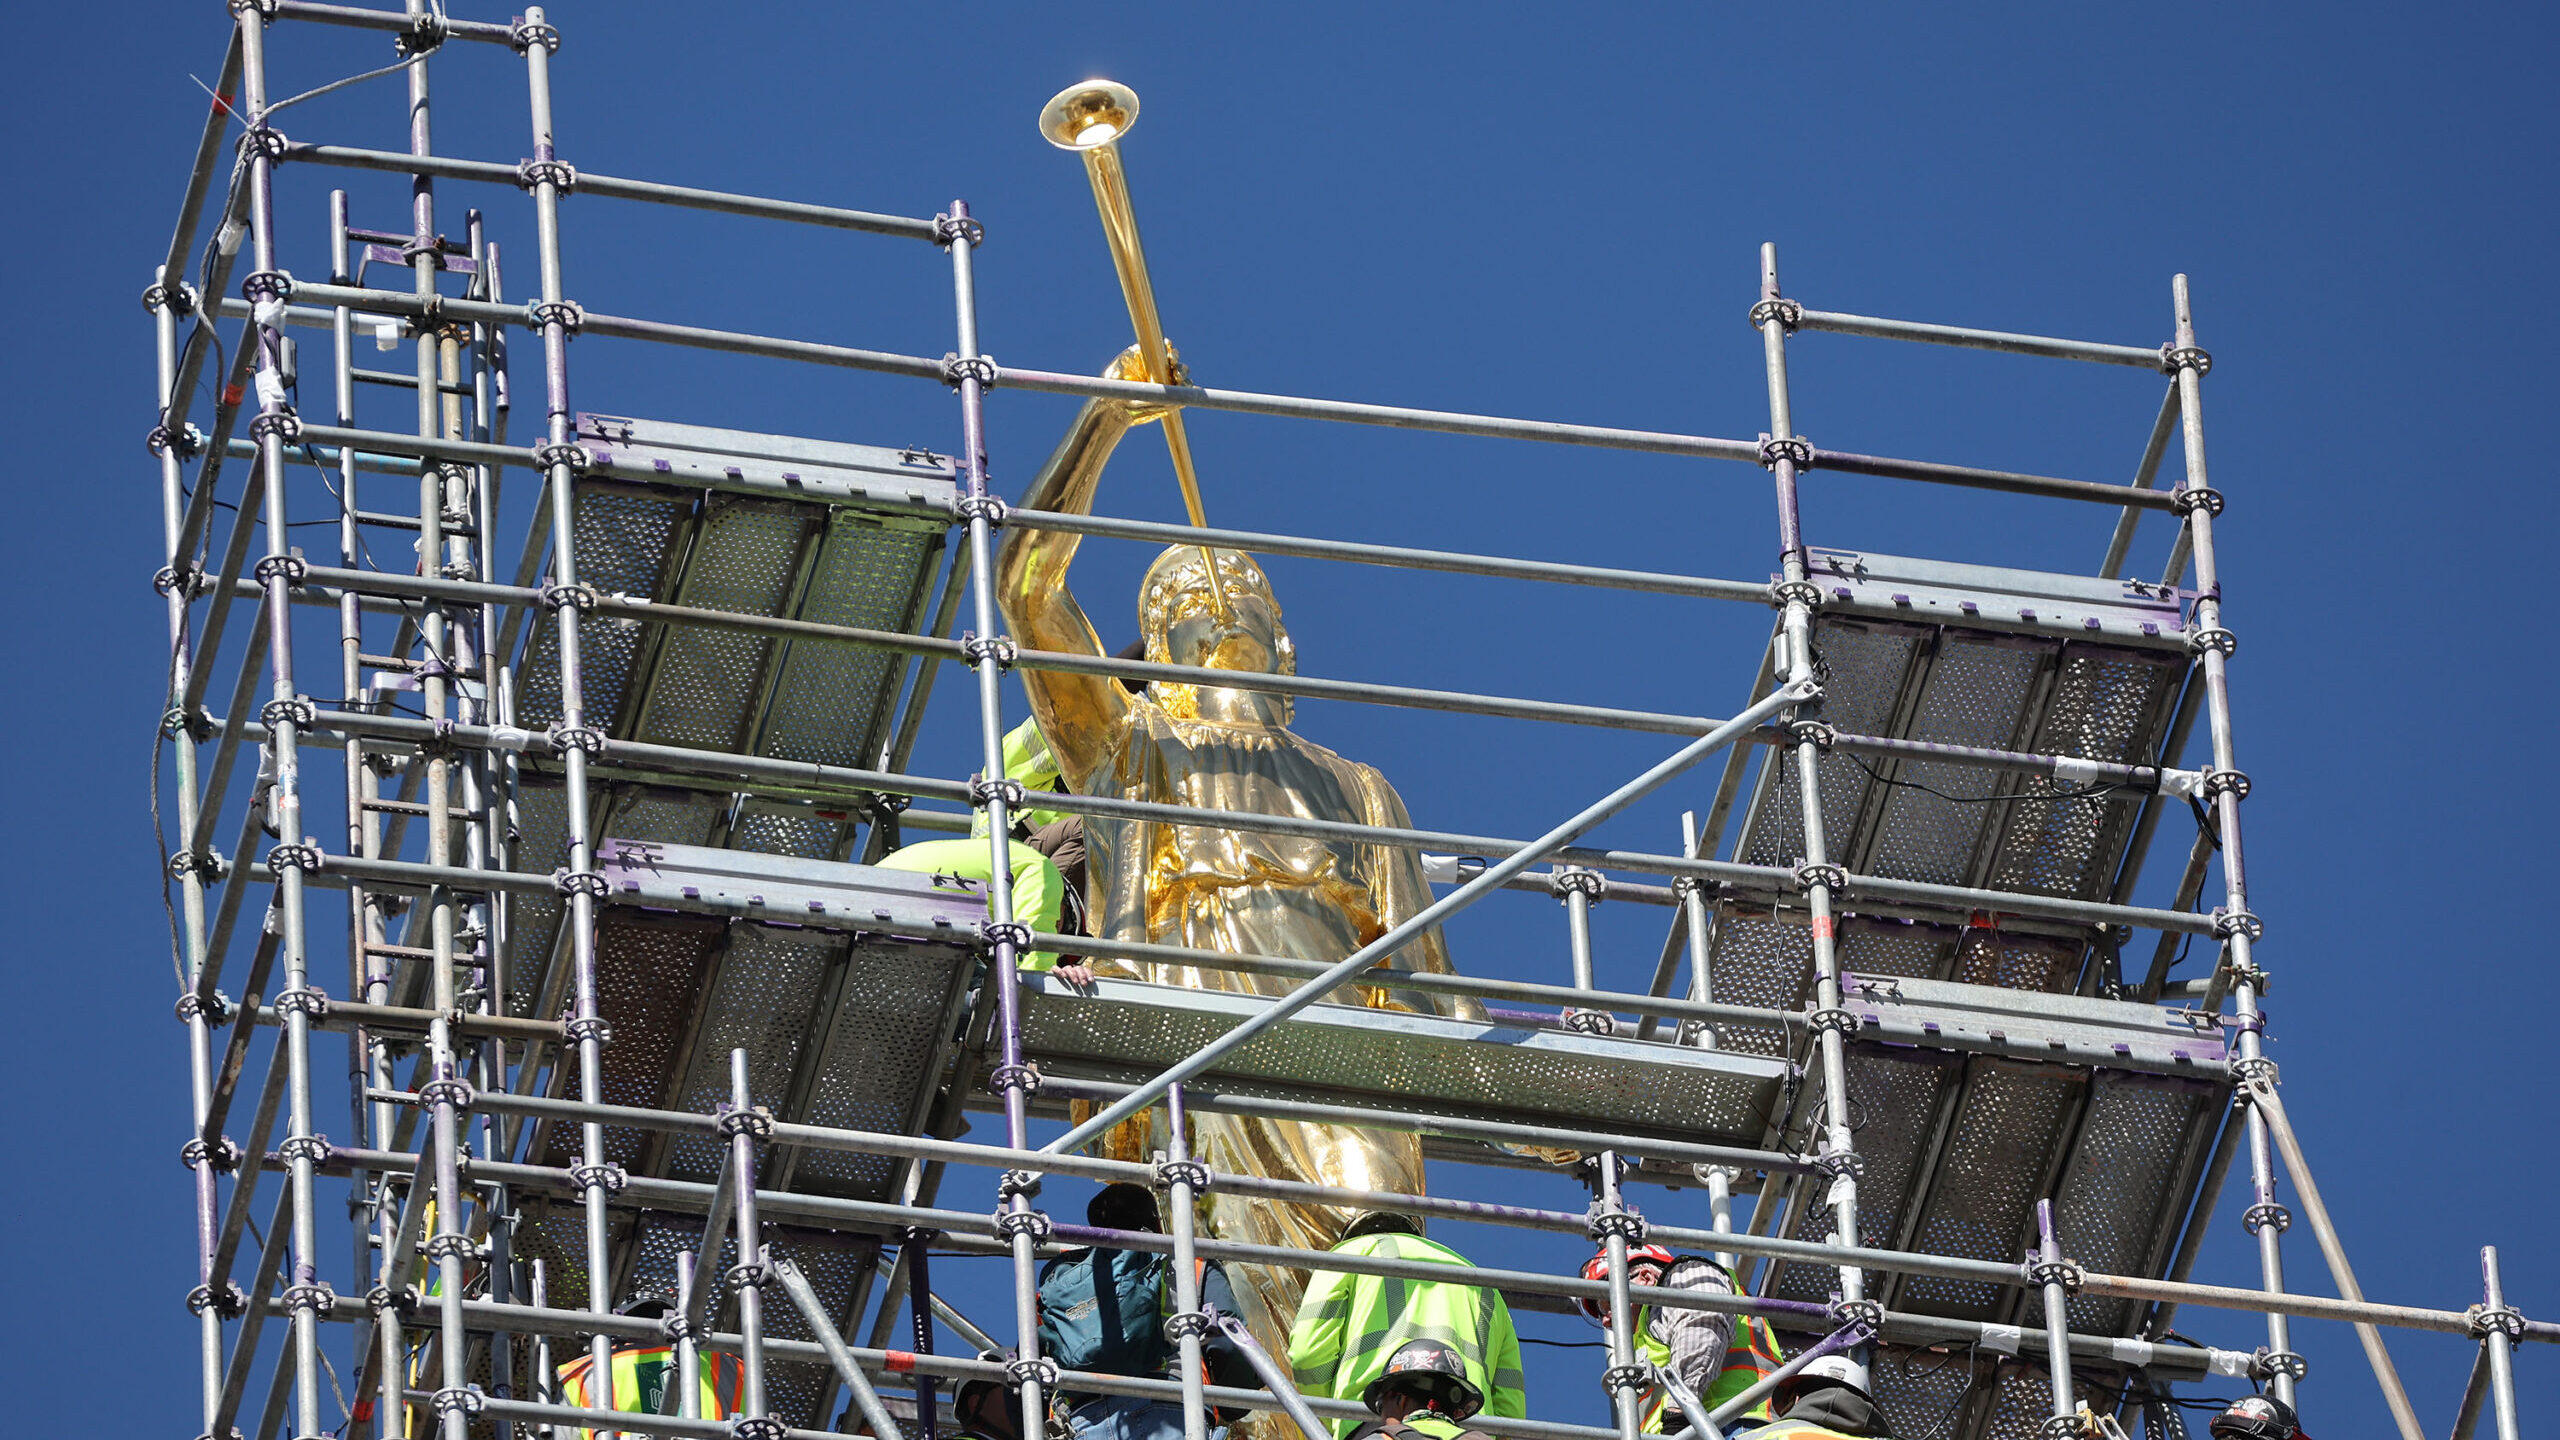 angel moroni statue returned to top of temple...